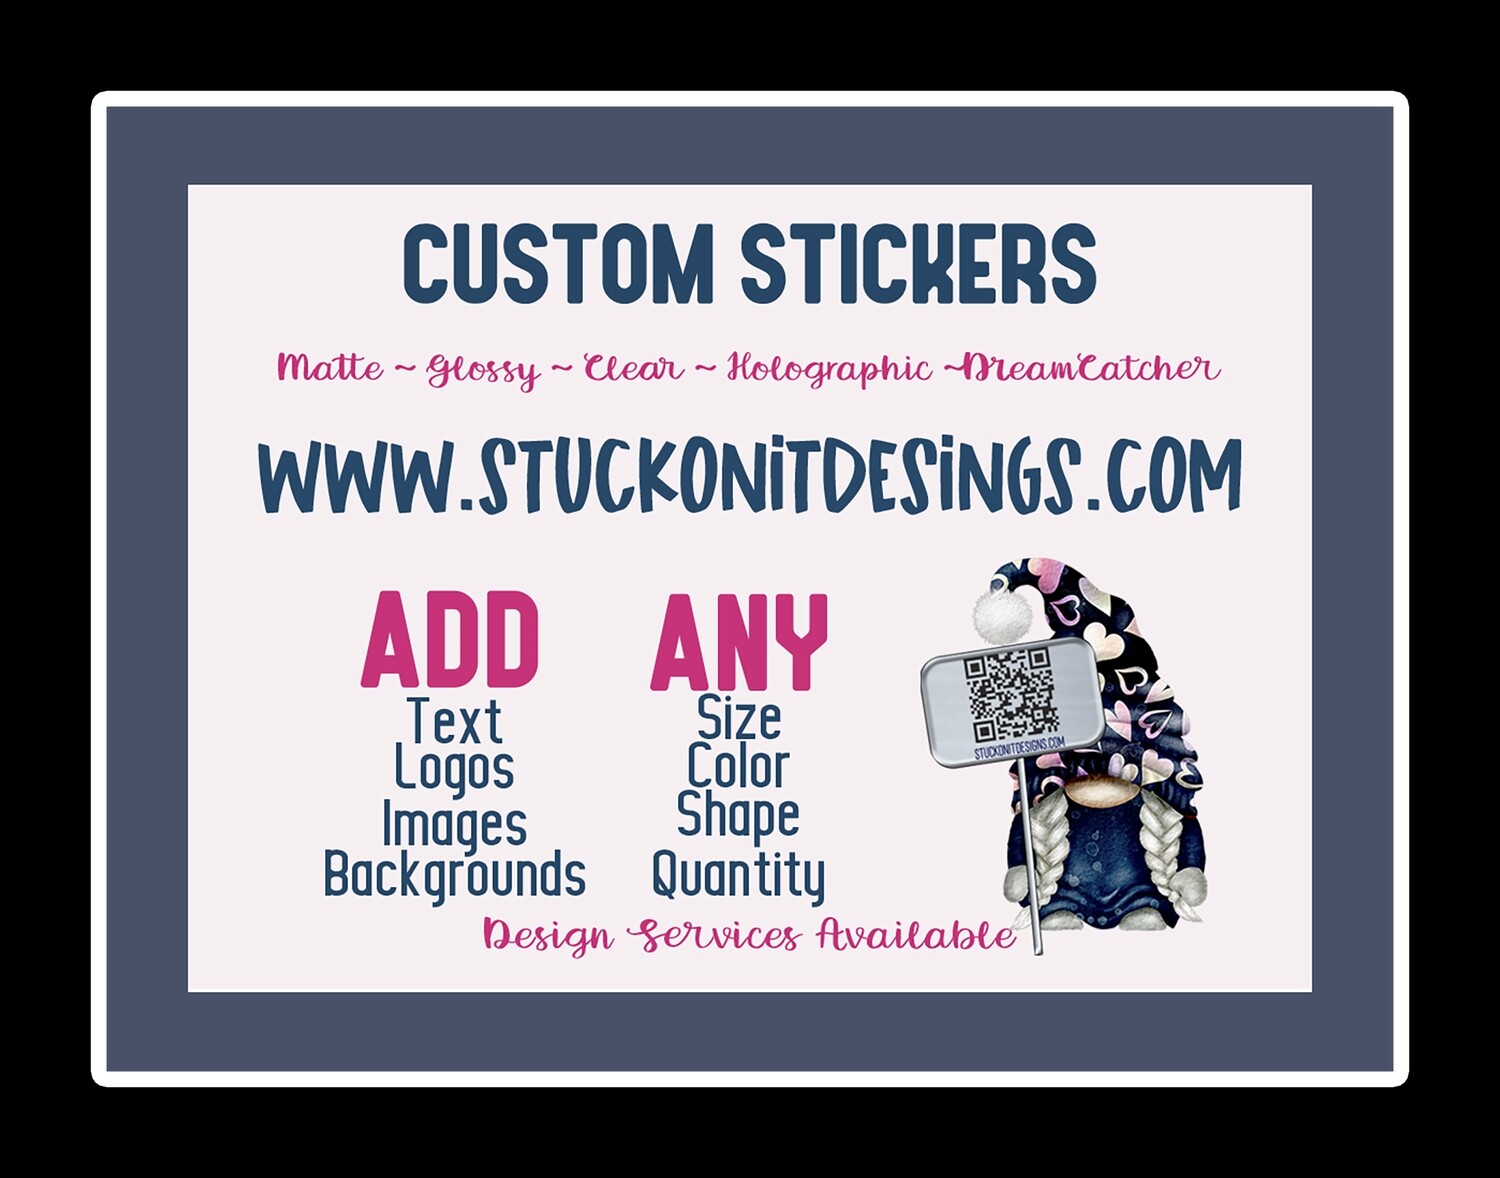 Custom Full Color Stickers Weatherproof Indoor/Outdoor Decal, Longest Side in Inches: 1 inch, Quantity of Stickers Per Design: 1